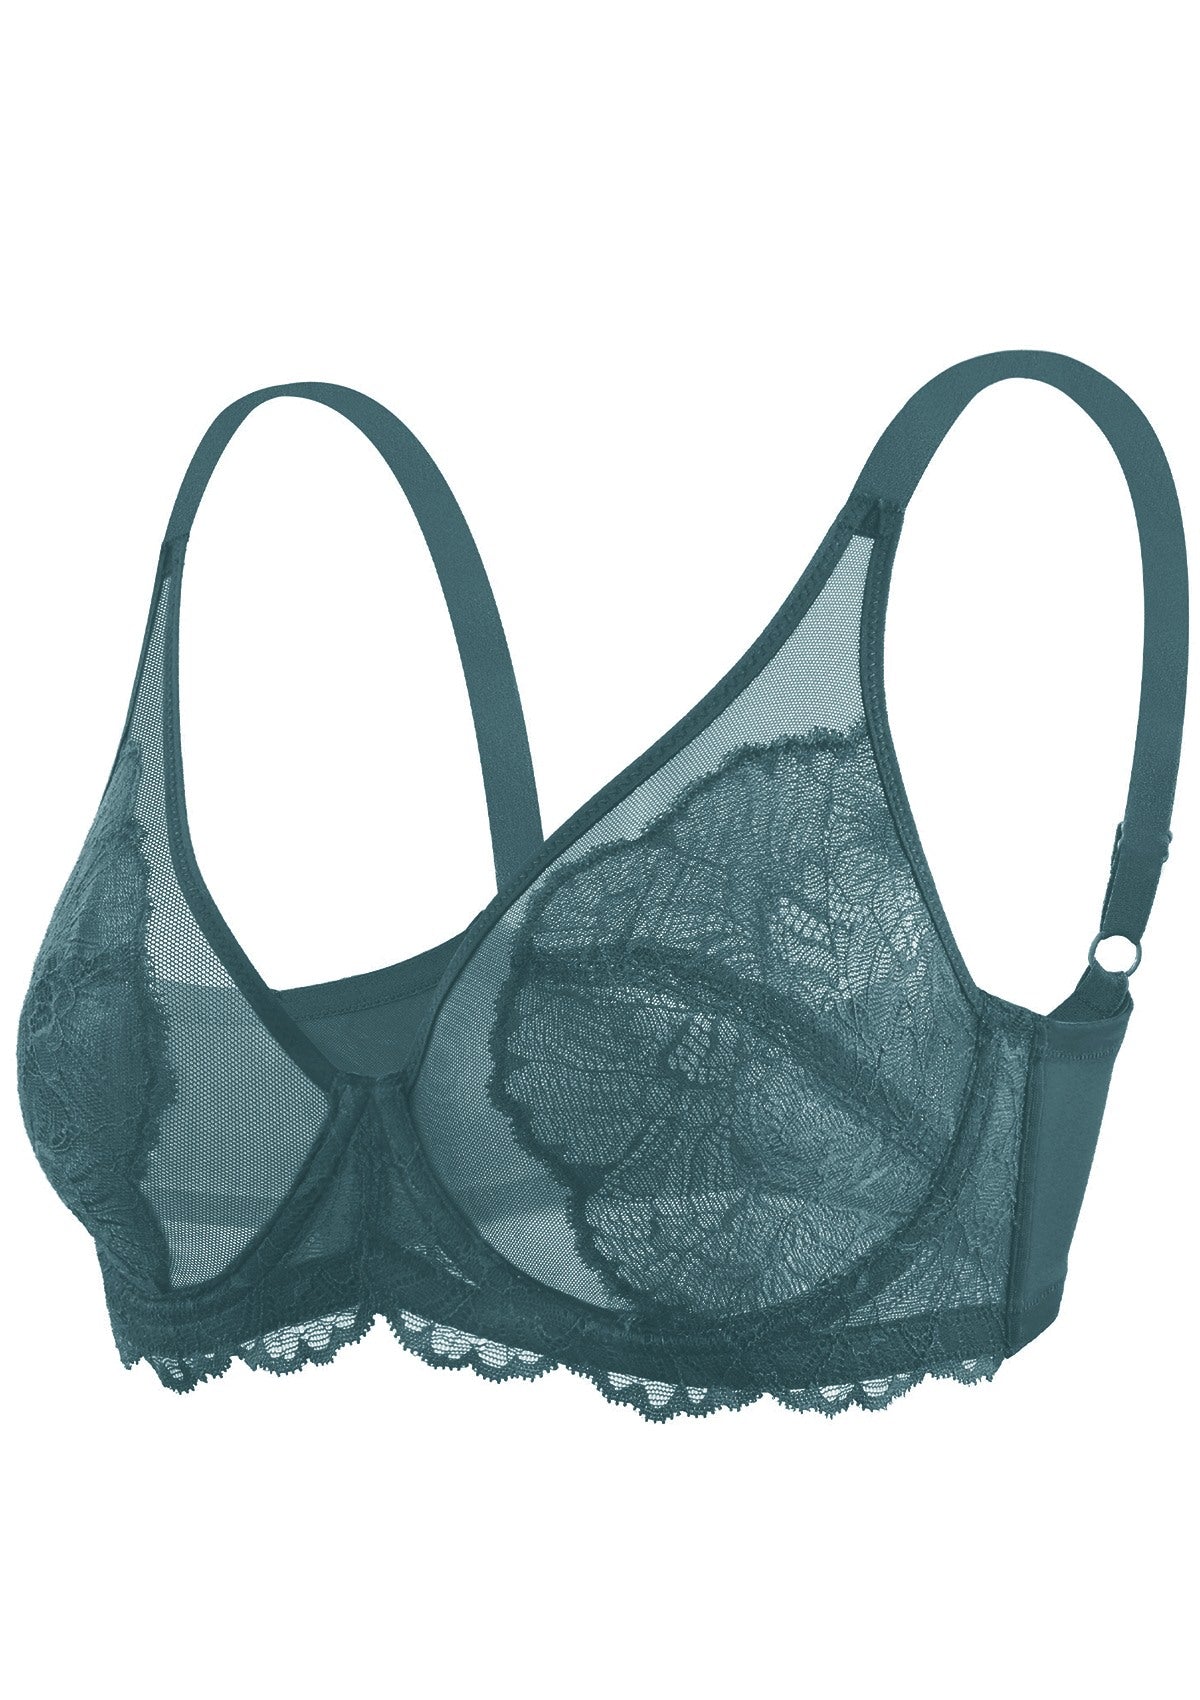 HSIA Blossom Full Figure See-Through Lace Bra For Side And Back Fat - Balsam Blue / 38 / D